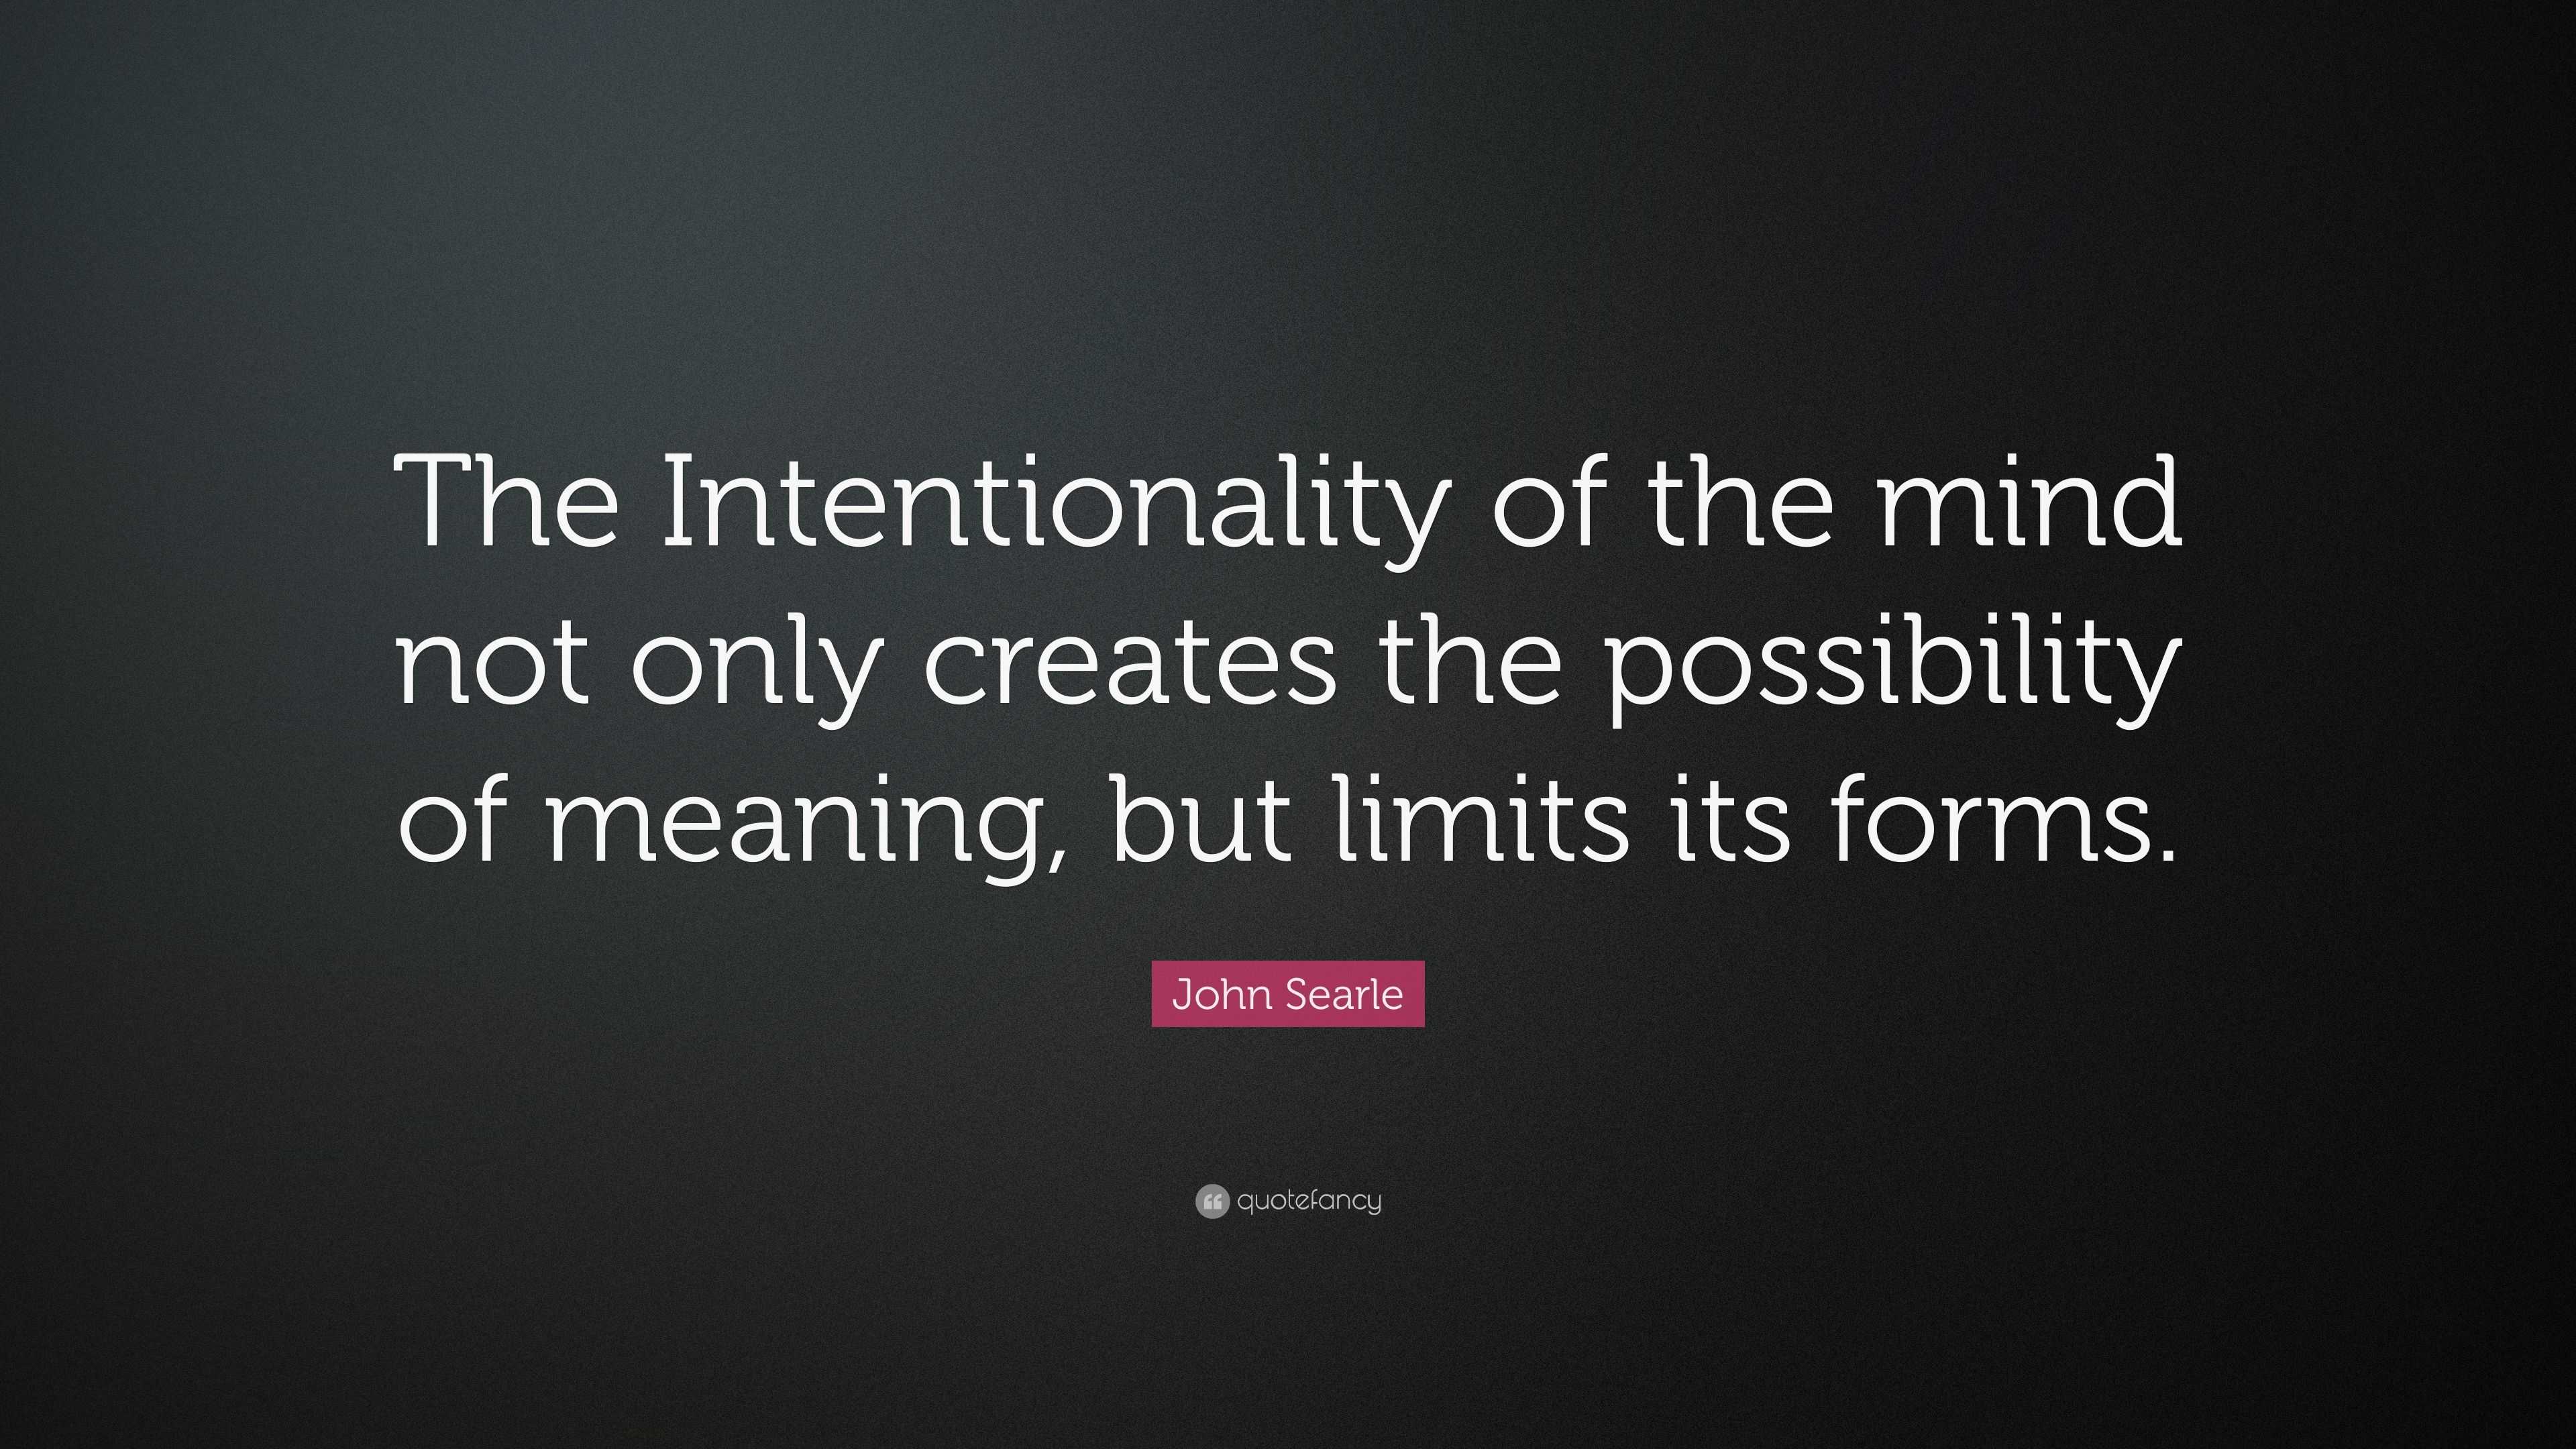 John Searle Quote: “The Intentionality of the mind not only creates the ...